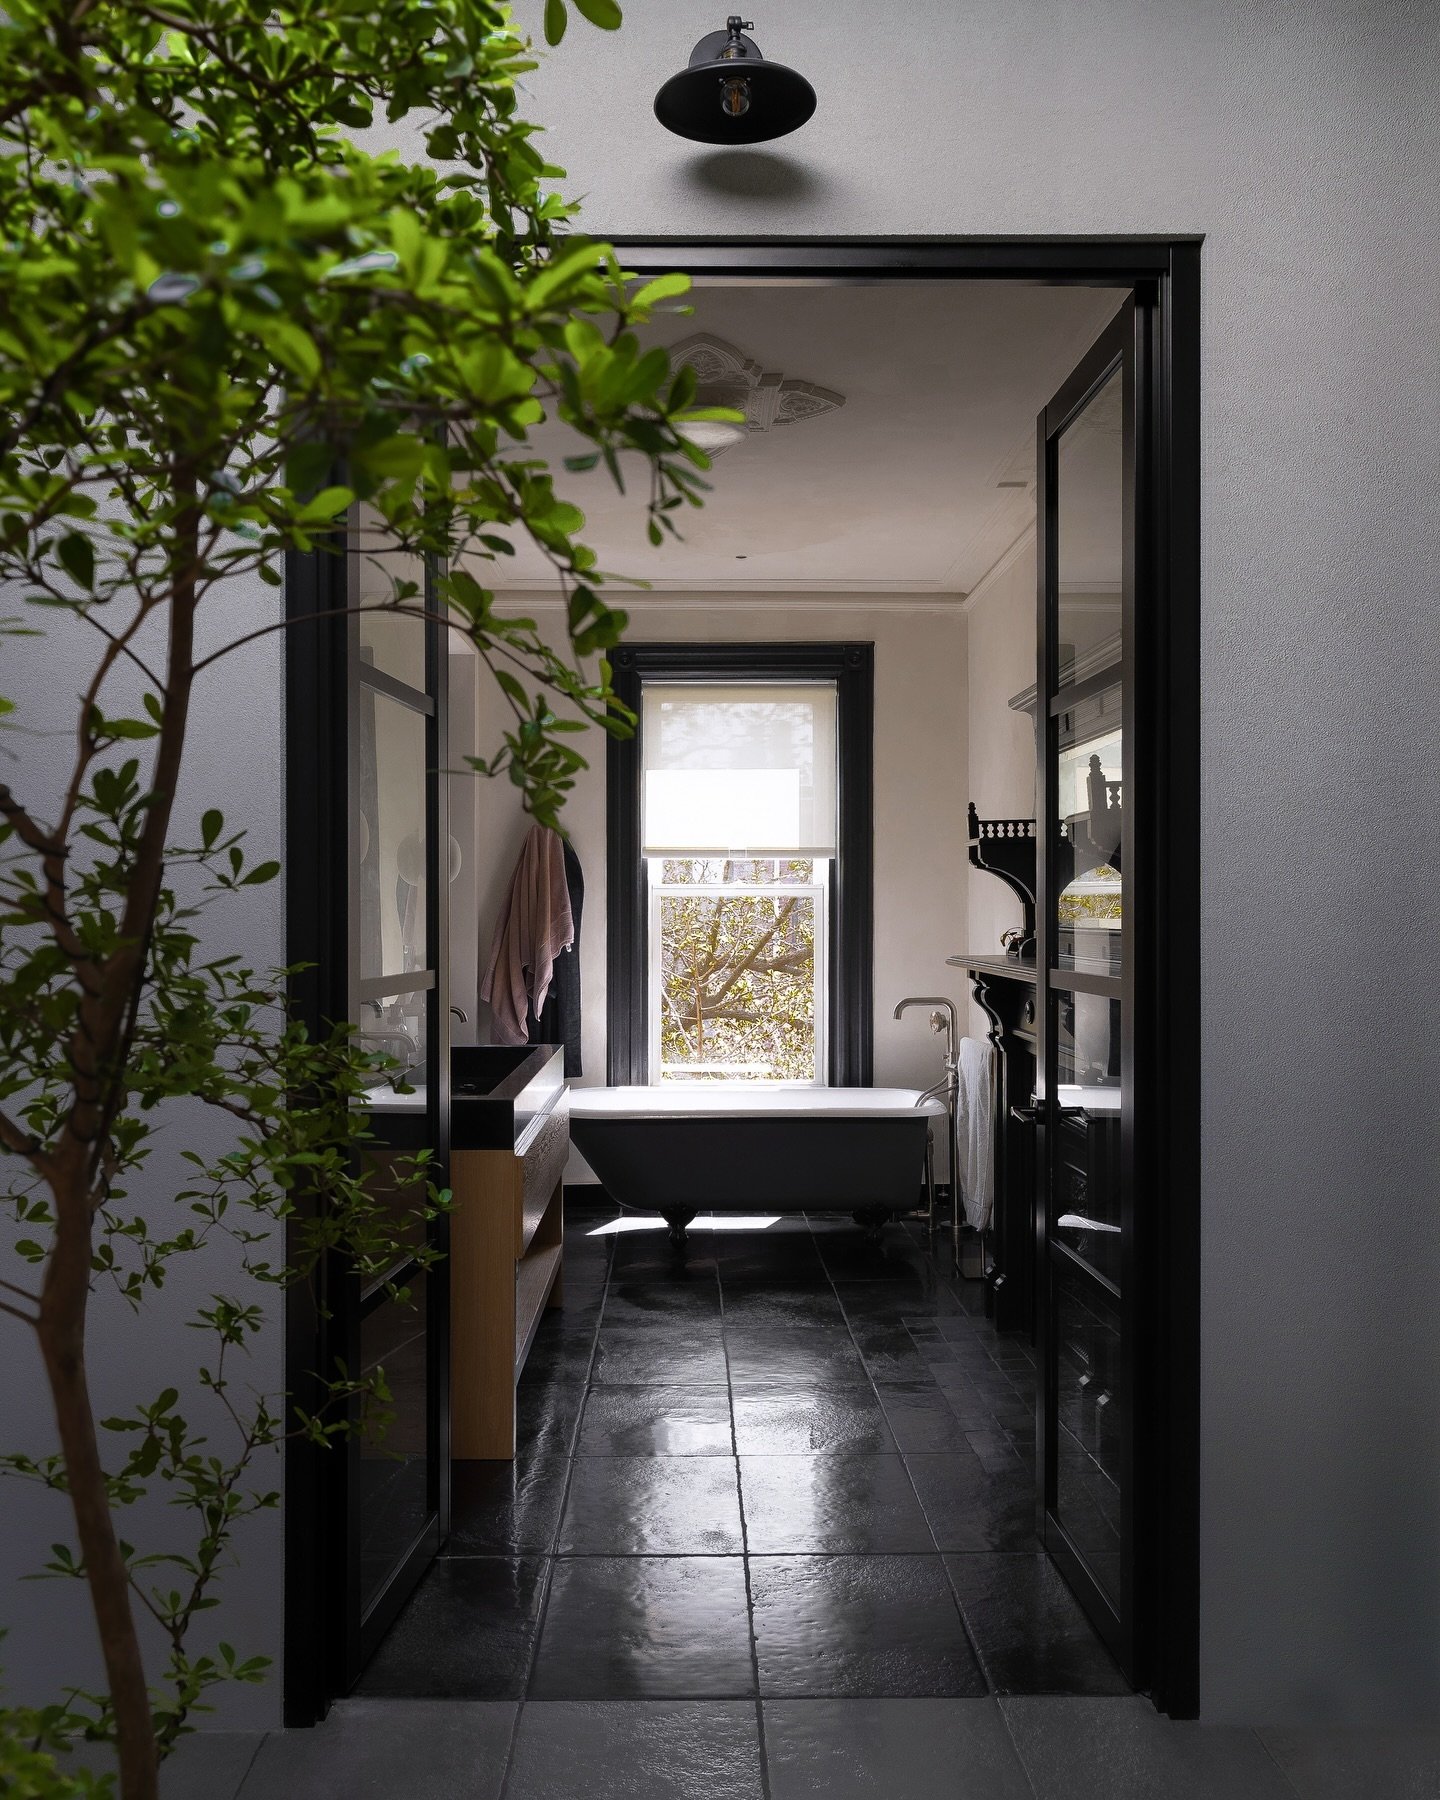 Sneak peek of our recently completed brownstone project in the historic Park Slope district in Brooklyn.
Pictured the primary bathroom, located at the home&rsquo;s upper level - it is accessed from the overhead-lit sunroom which features an oversized